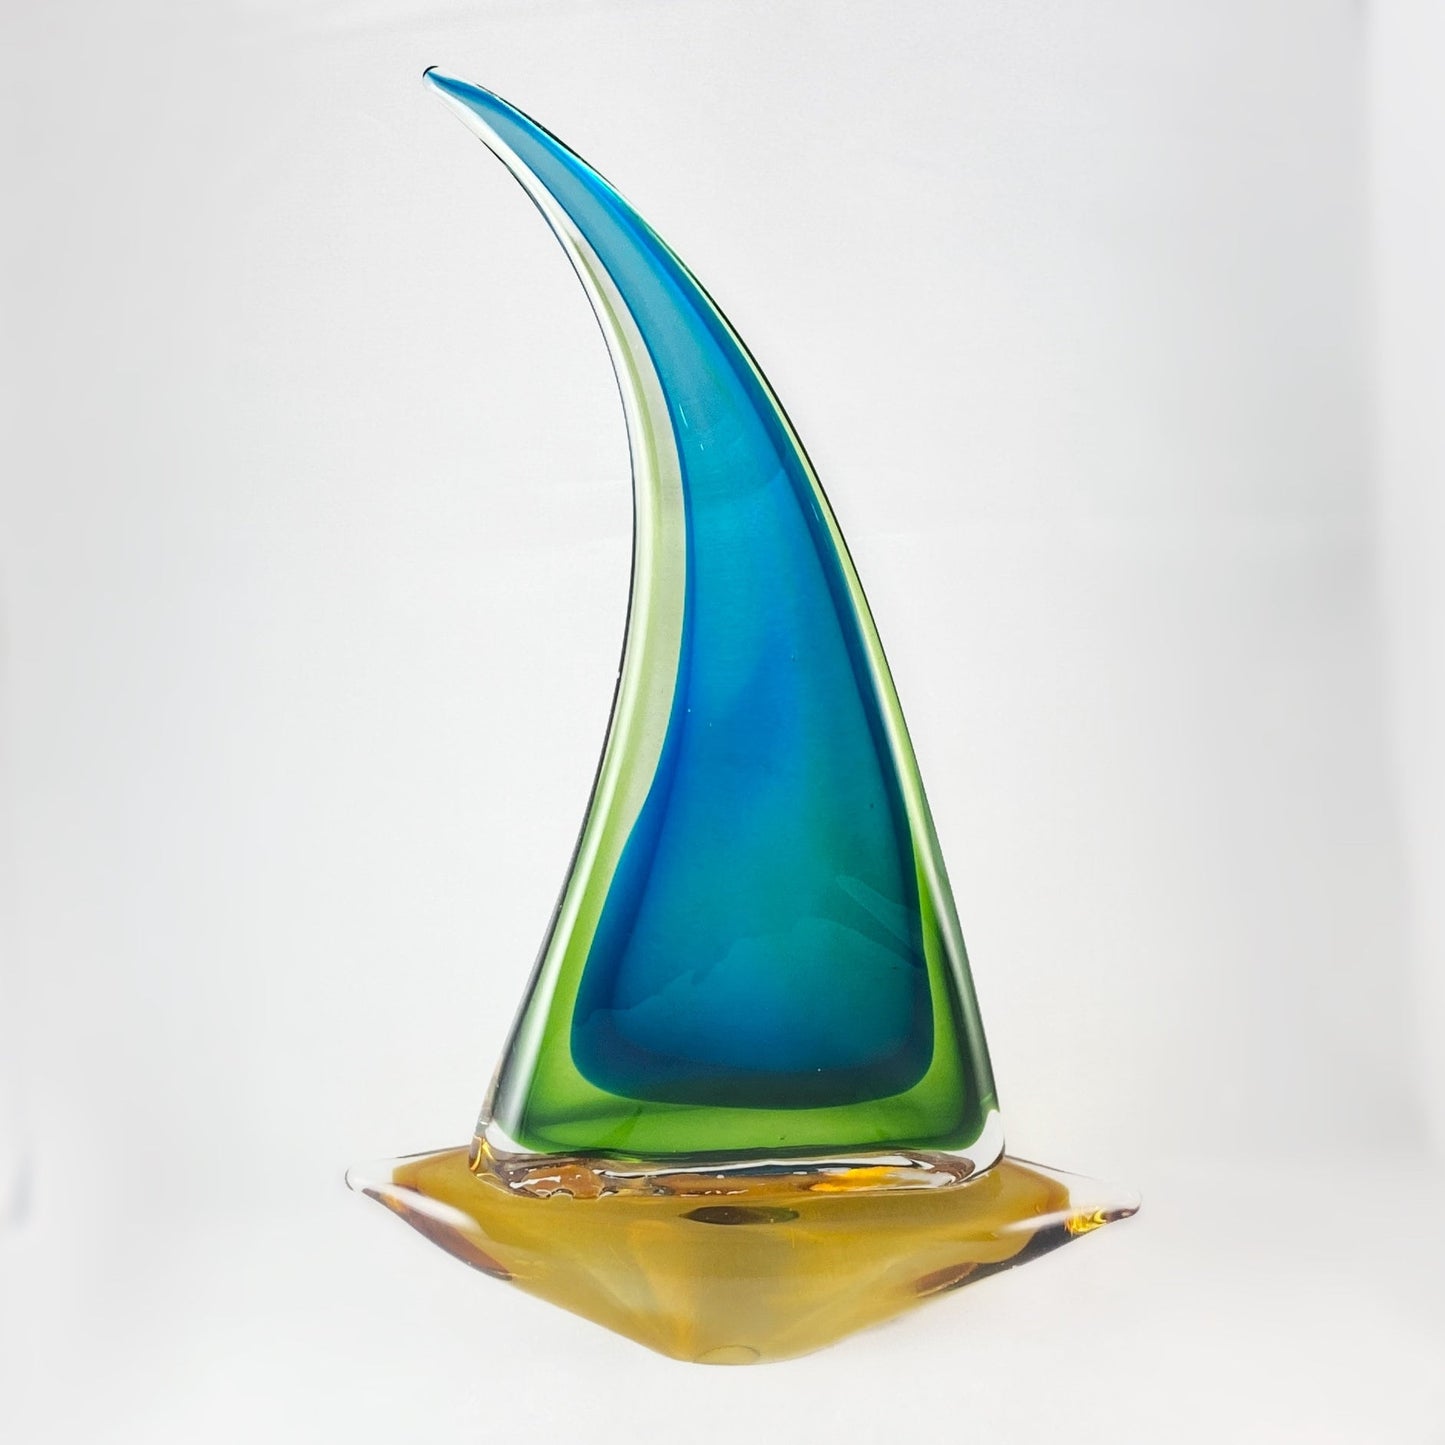 Glass Sailboat Centerpiece - Blue and Green Boat Home Décor